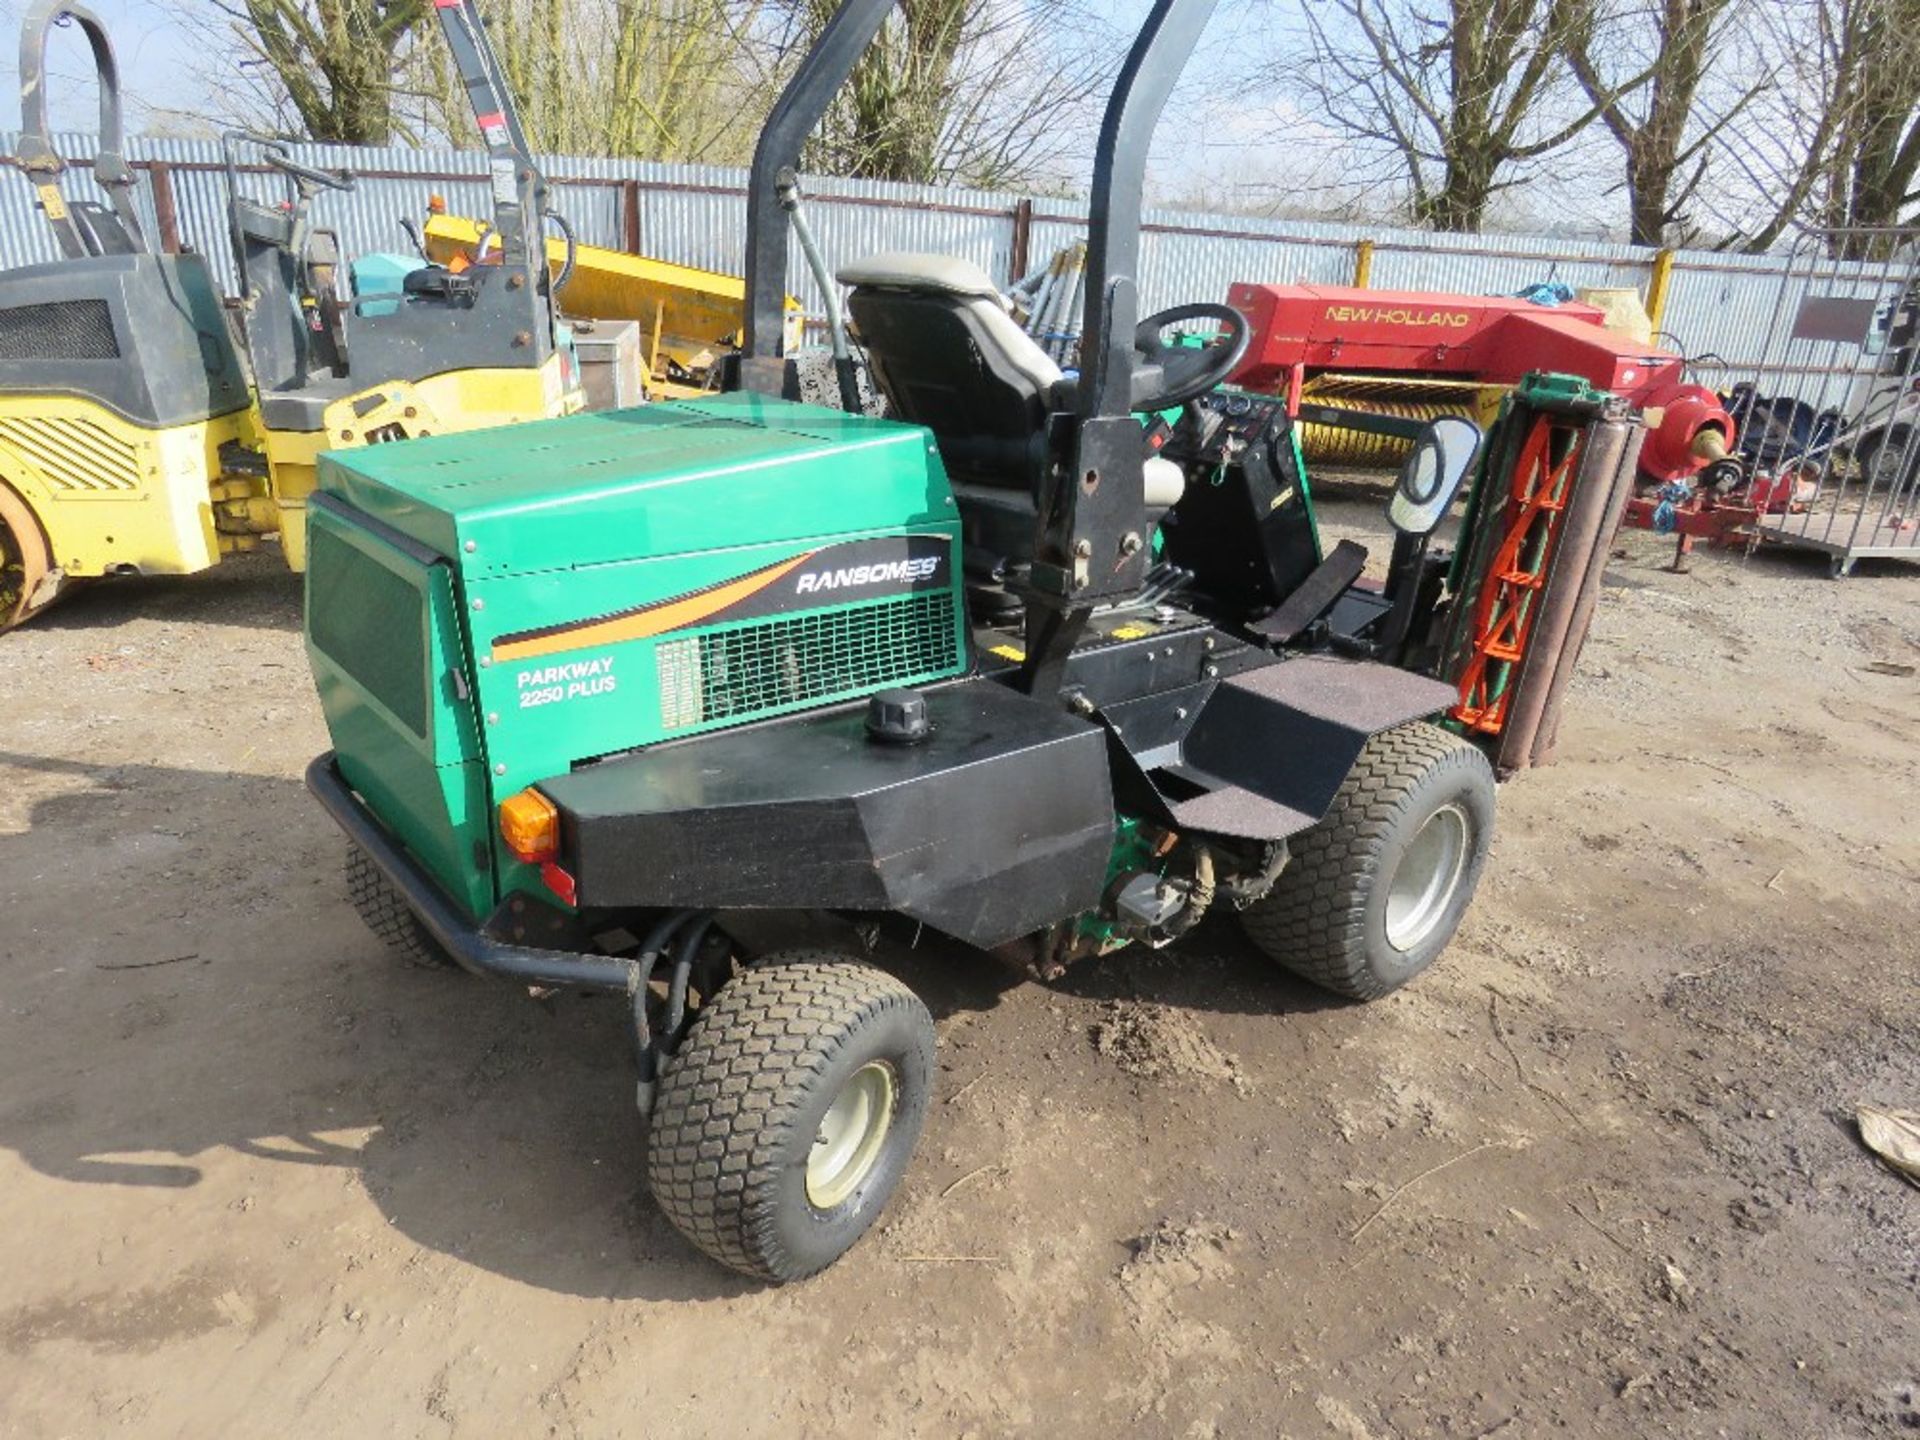 RANSOMES PARKWAY 2250 PLUS PROFESSIONAL TRIPLE RIDE ON MOWER, 4WD, 3300 REC HOURS. DIRECT FROM GOLF - Bild 3 aus 11